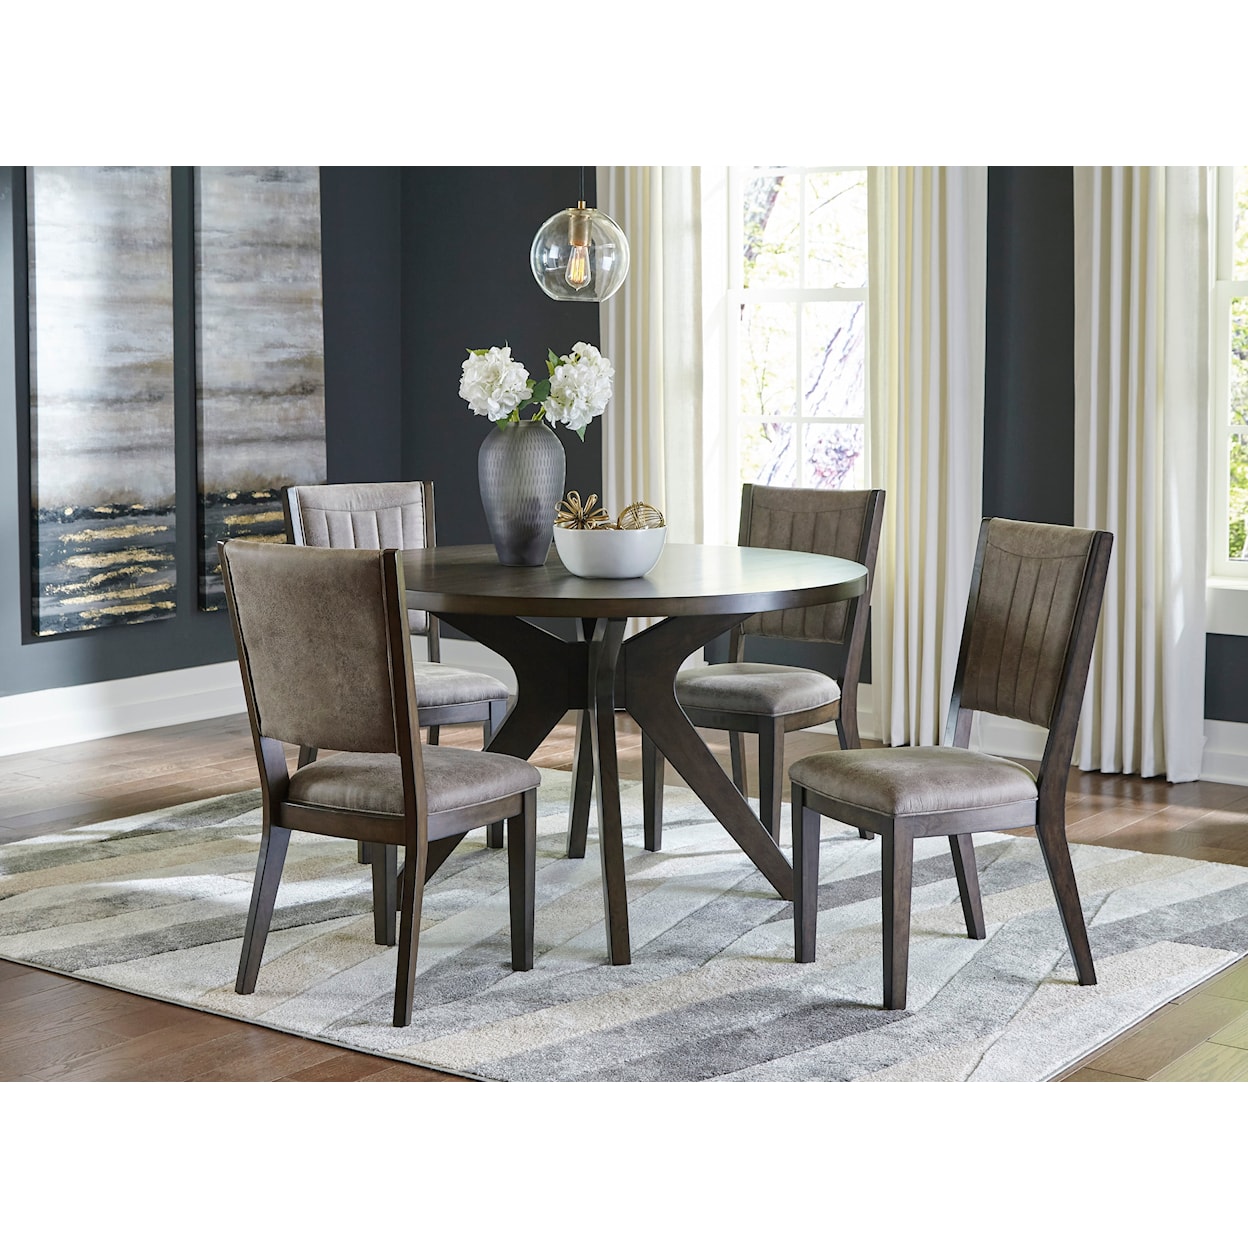 Signature Design by Ashley Wittland 4-Piece Dining Set